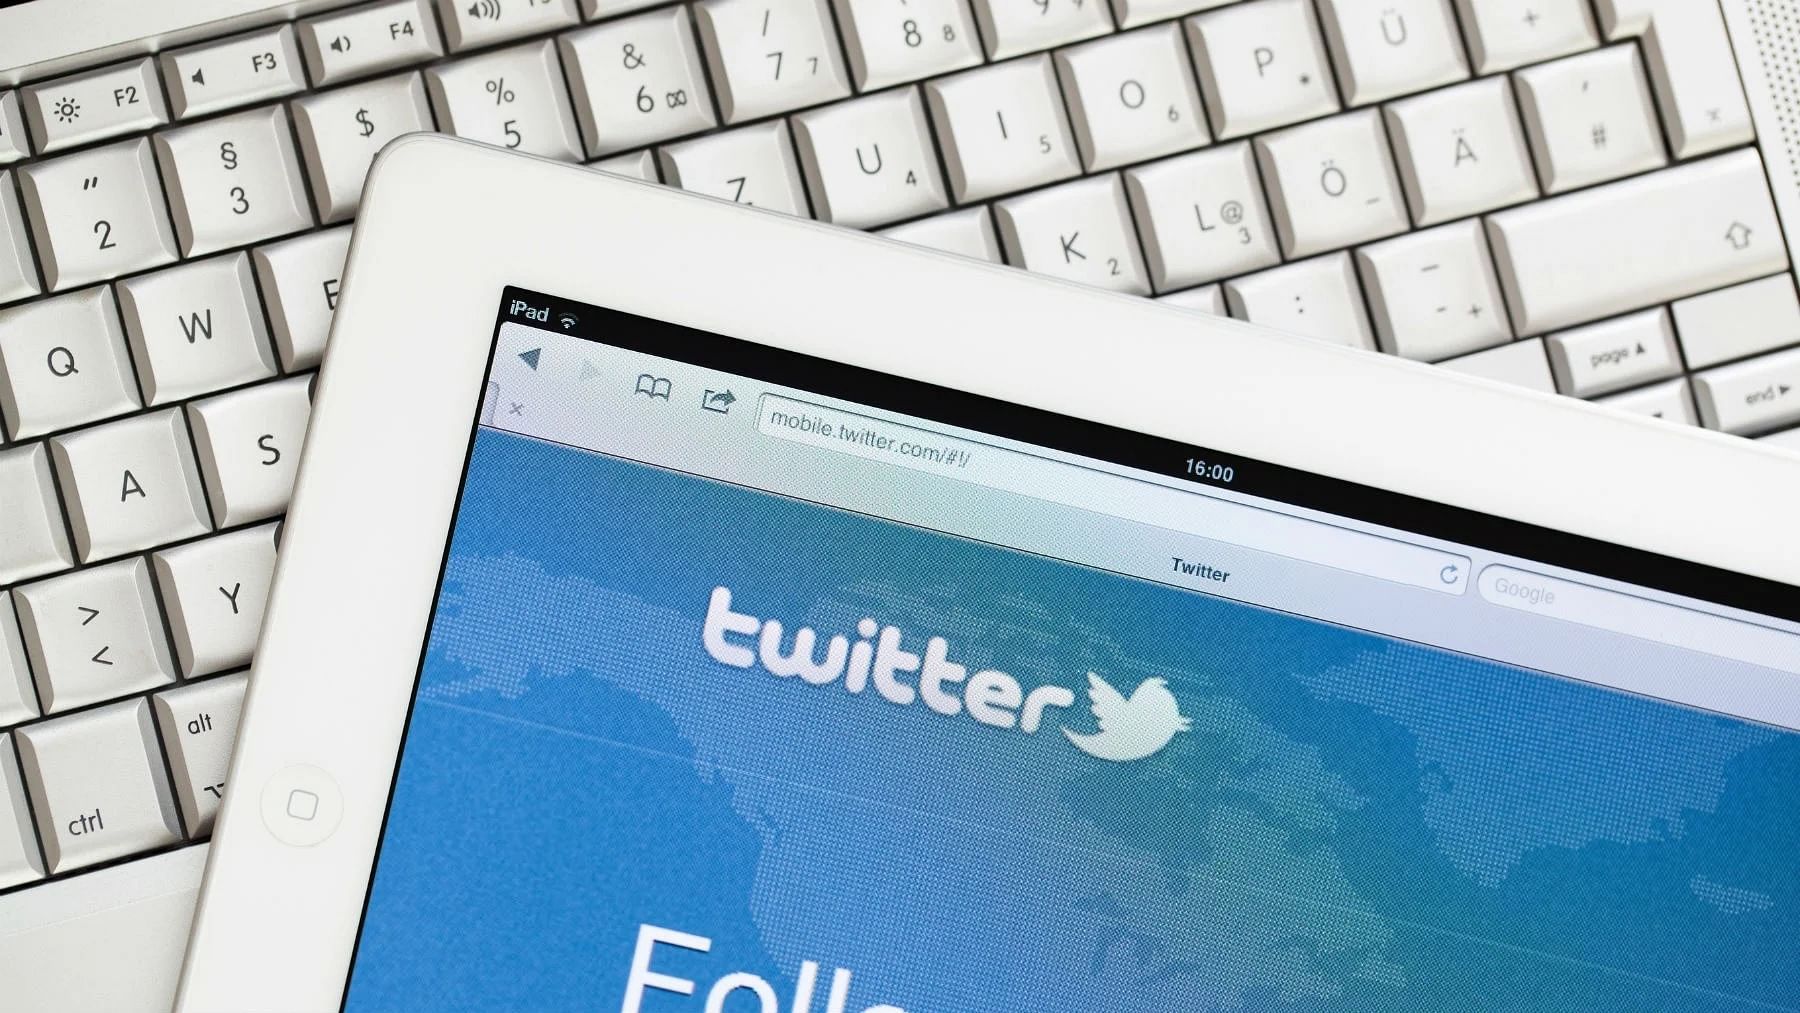 Twitter users on iPhone have been hit by another security mishap.